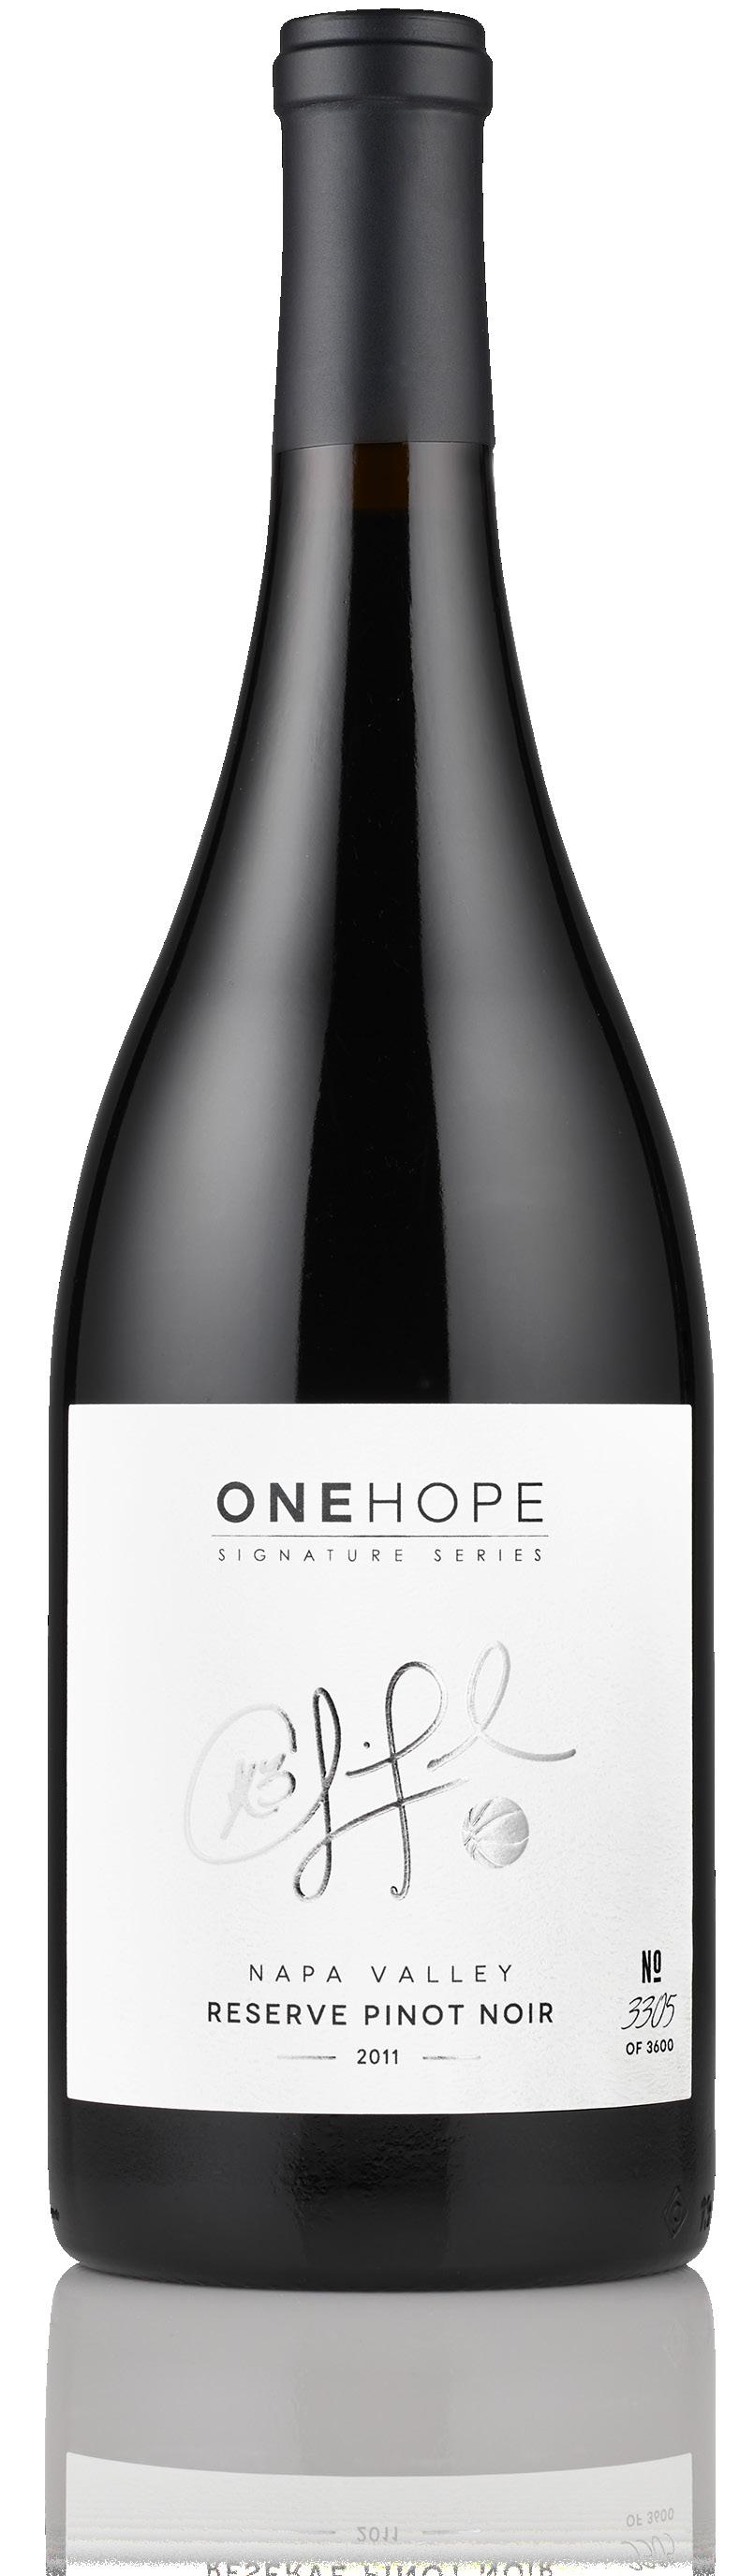 ONEHOPE CHRIS PAUL SIGNATURE SERIES PINOT NOIR ripe cherry raspberry toasted vanilla Flavors of raspberry, ripe cherry and toasted vanilla followed by a lingering finish consisting of allspice and